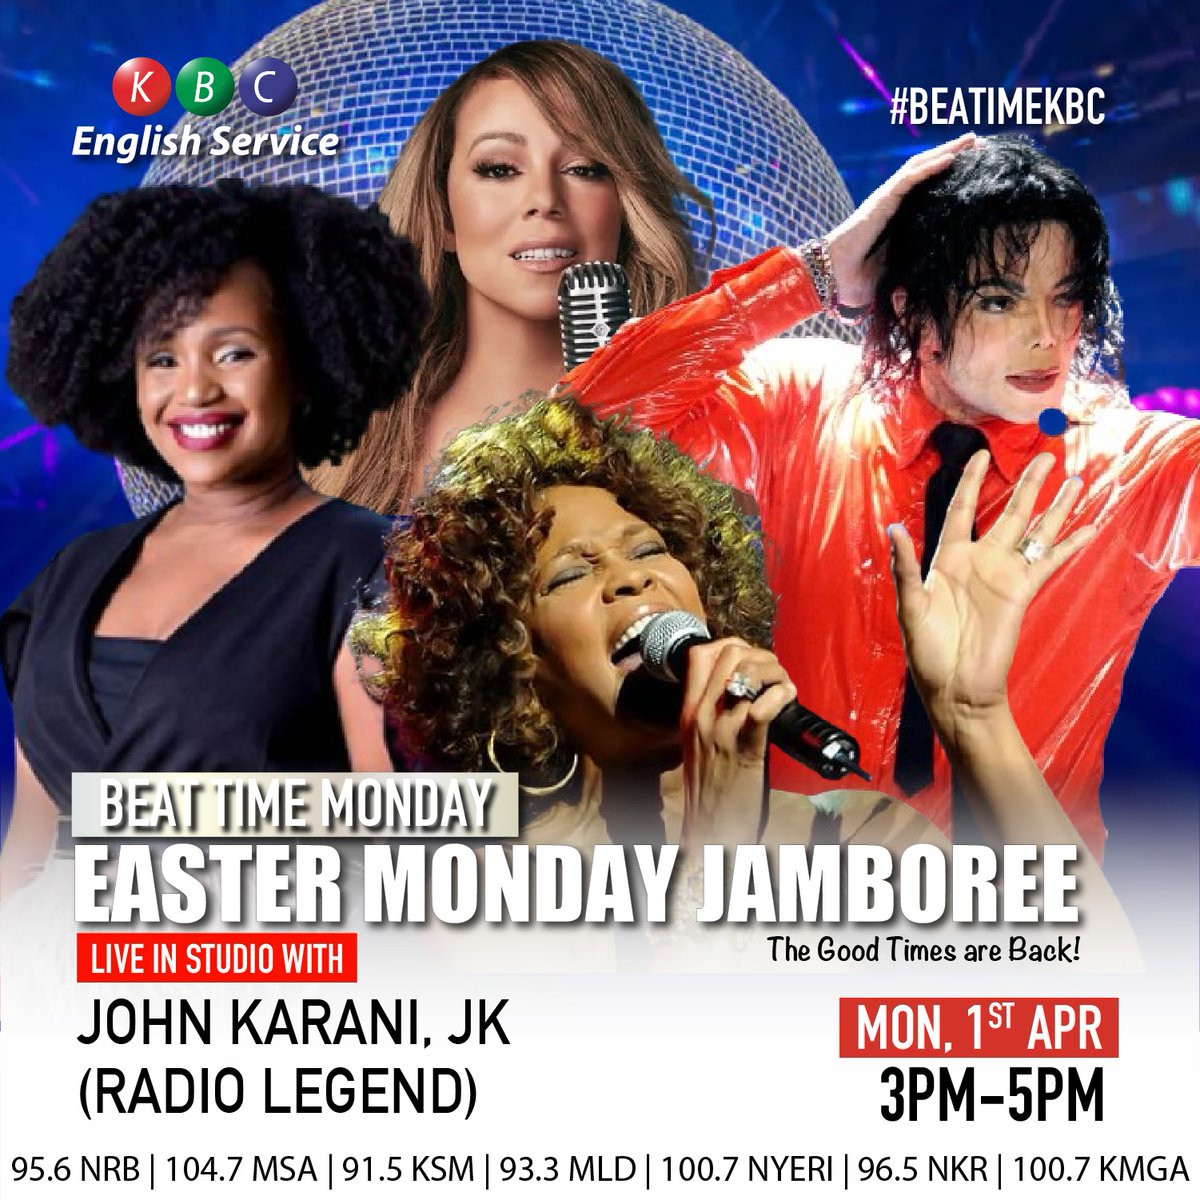 Brand New Week starts off with a holiday. Easter Monday Beatime Jamboree. I got Amani, Mariah,Whitney and MJ set to thrill you. Who else should be on this holiday playlist? Shout out @kbcenglish @johnkaranijk . Goodtimes are back. #beatimekbc